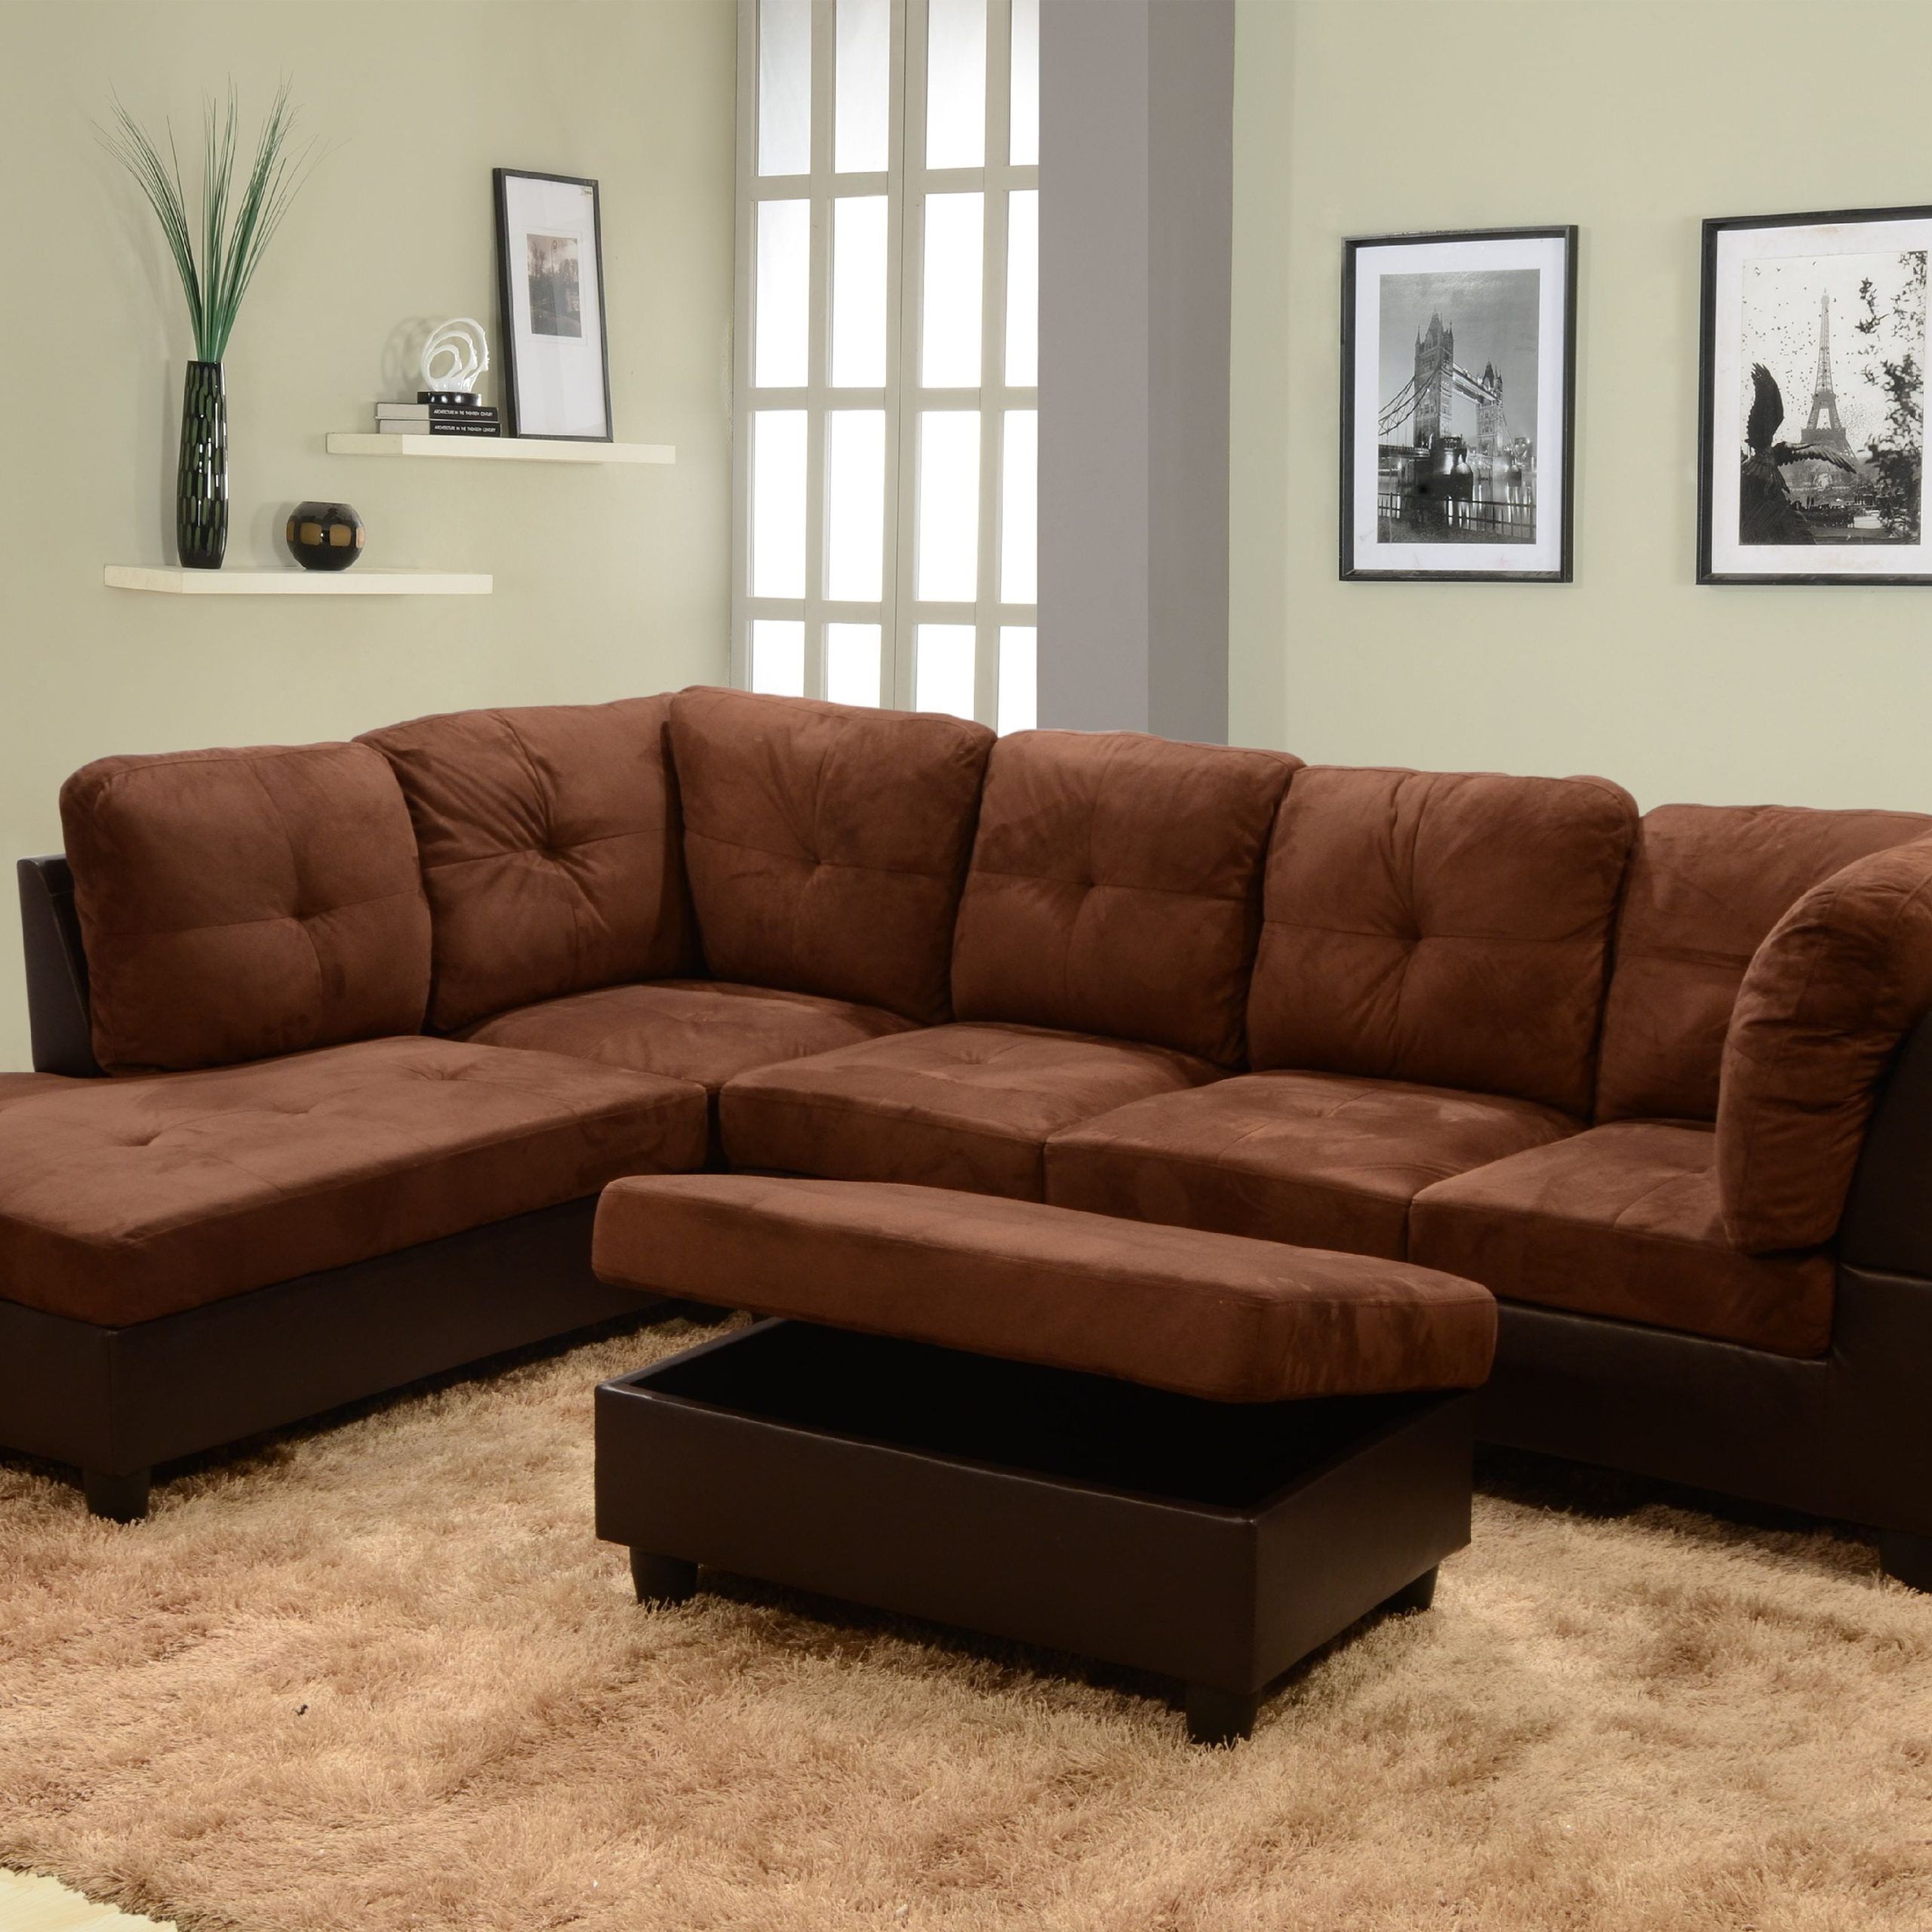 Matt Right Facing Sectional Sofa With Ottoman,chocolate – Walmart Within Best And Newest Sofas With Ottomans (Photo 3 of 15)